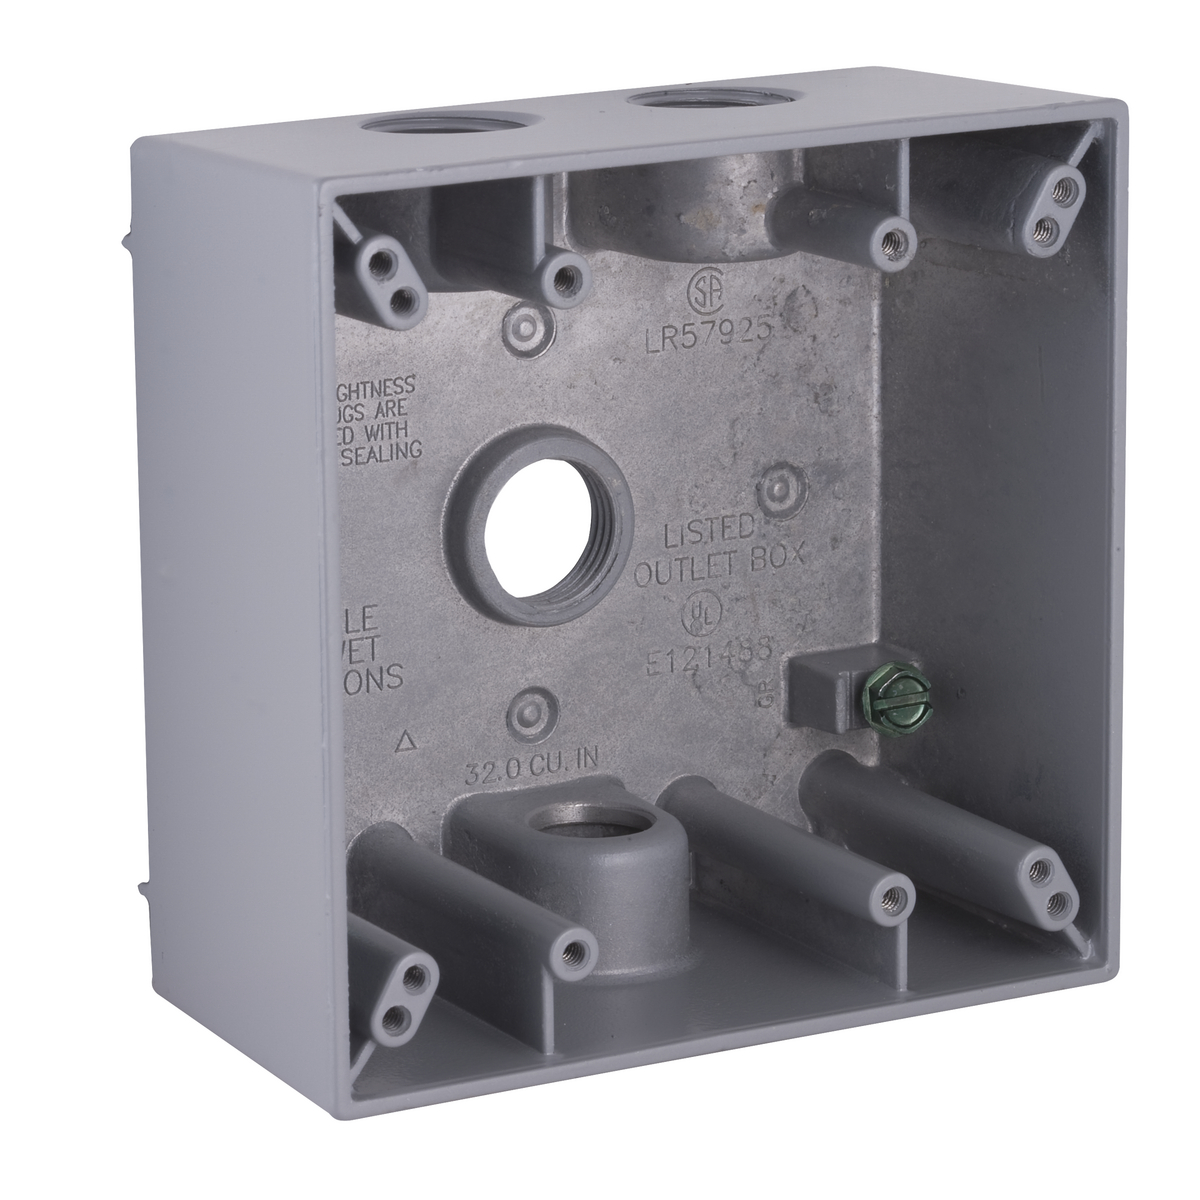 2G WP BOX (4) 1/2 IN. OUTLETS - GRAY